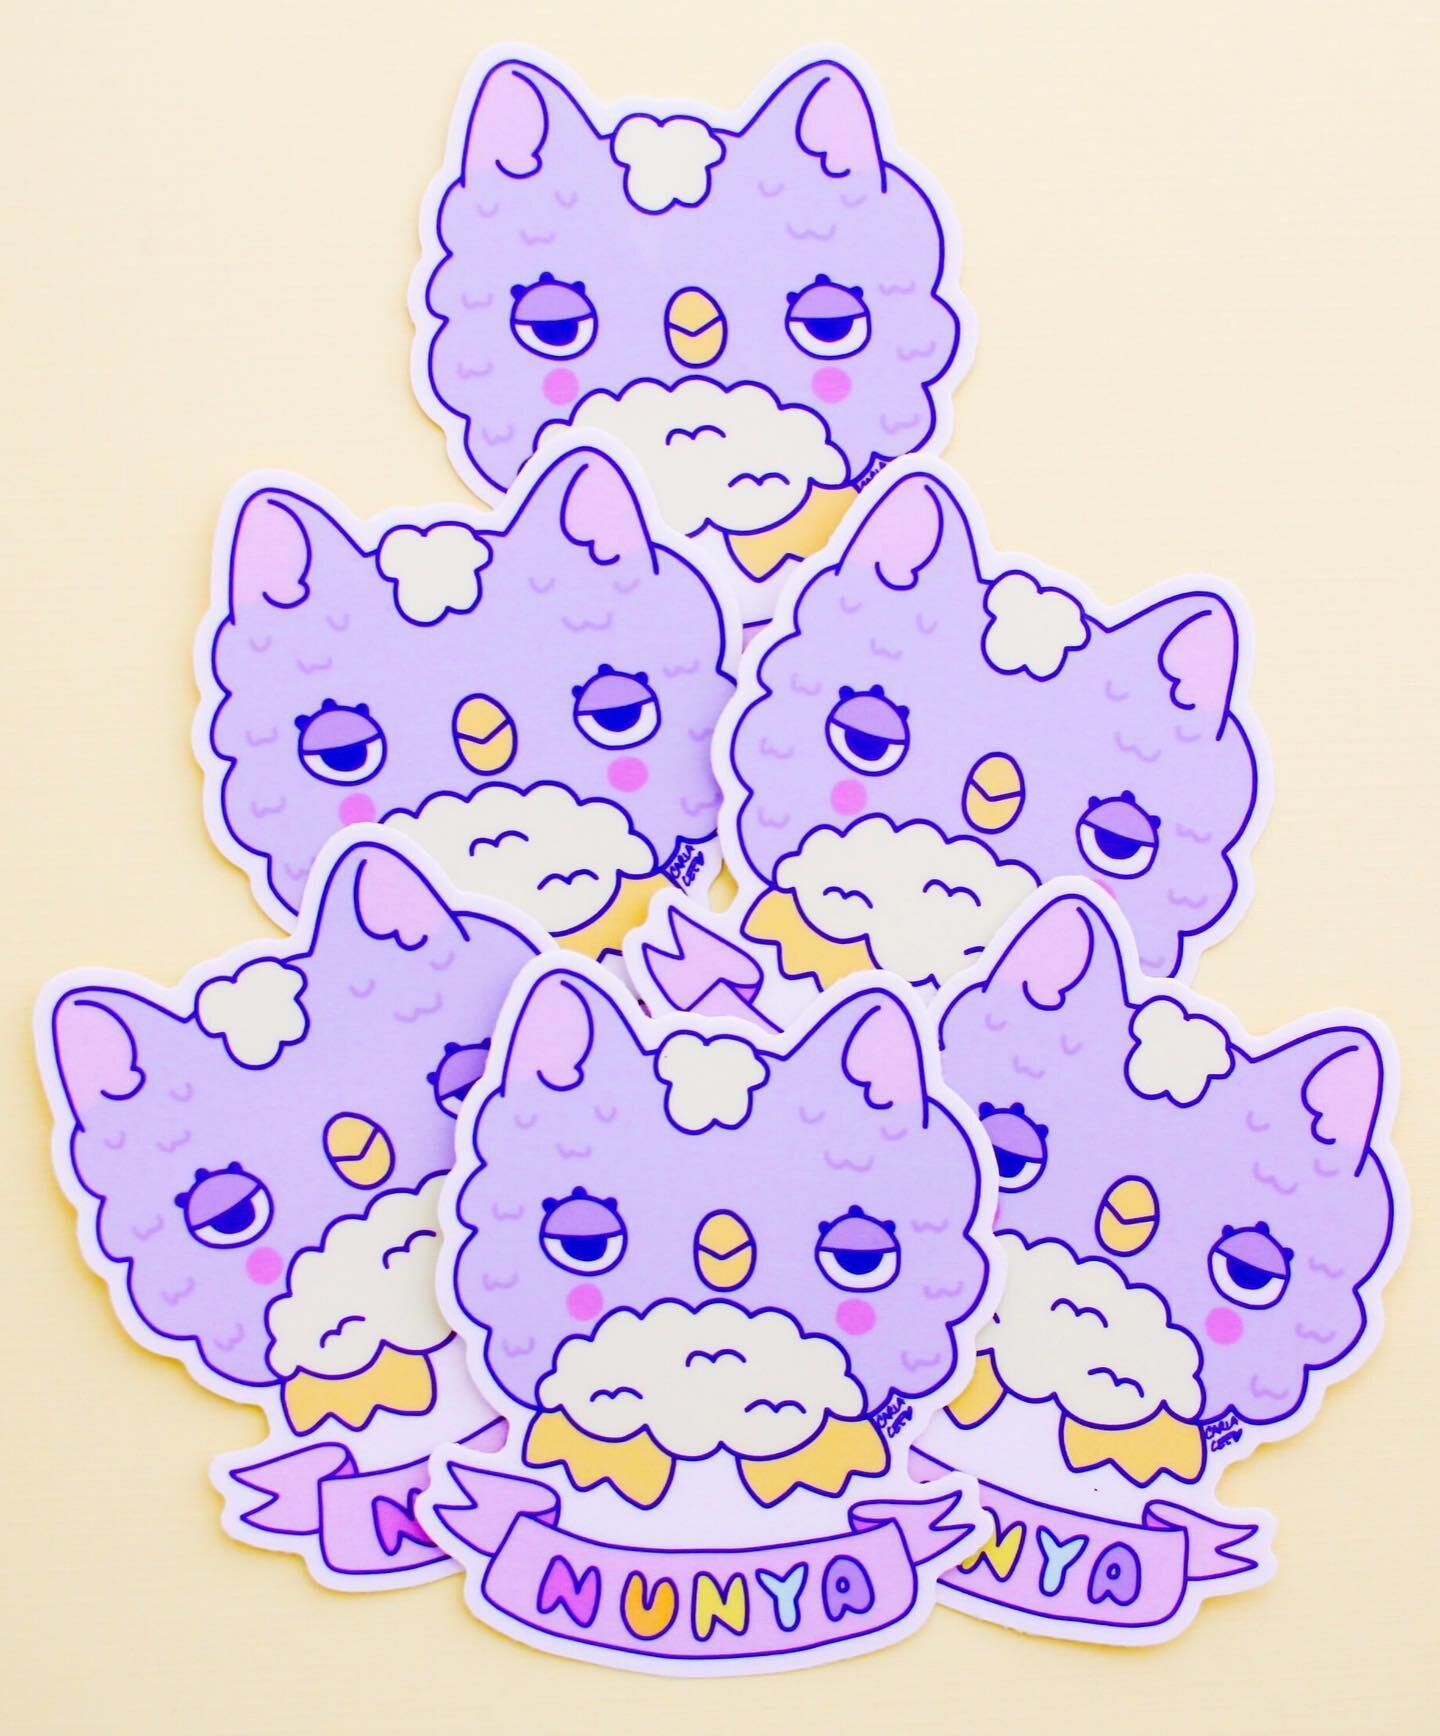 The furbs are assembling!
.
These fluffy bois will be part of Friday&rsquo;s shop update. They&rsquo;re a dang mood if there ever was one.
.
These drop in the shop this Friday at noon CDT. 💜
.
.
#stickers #furbyart #vinylstickers #cutestickers #kawa